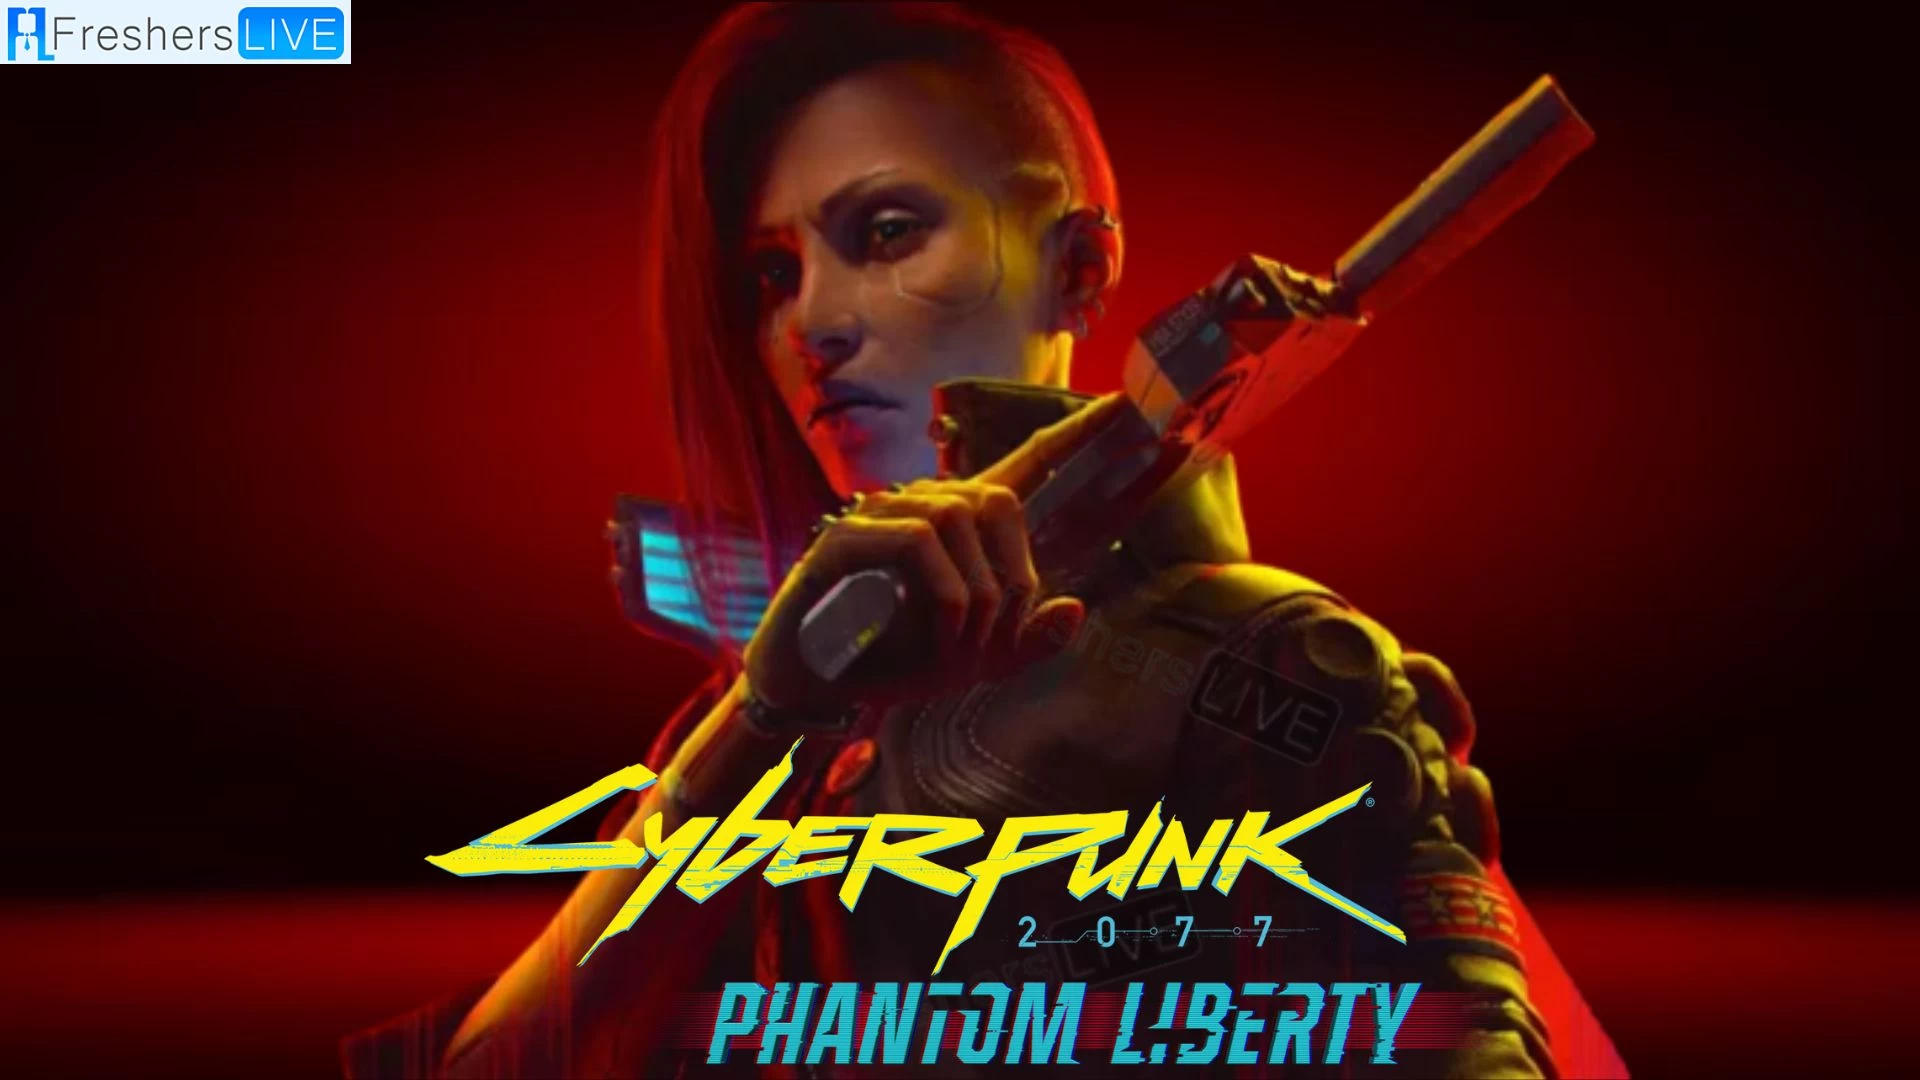 How to Collect AirDrops in Cyberpunk 2077 Phantom Liberty? A Complete Guide